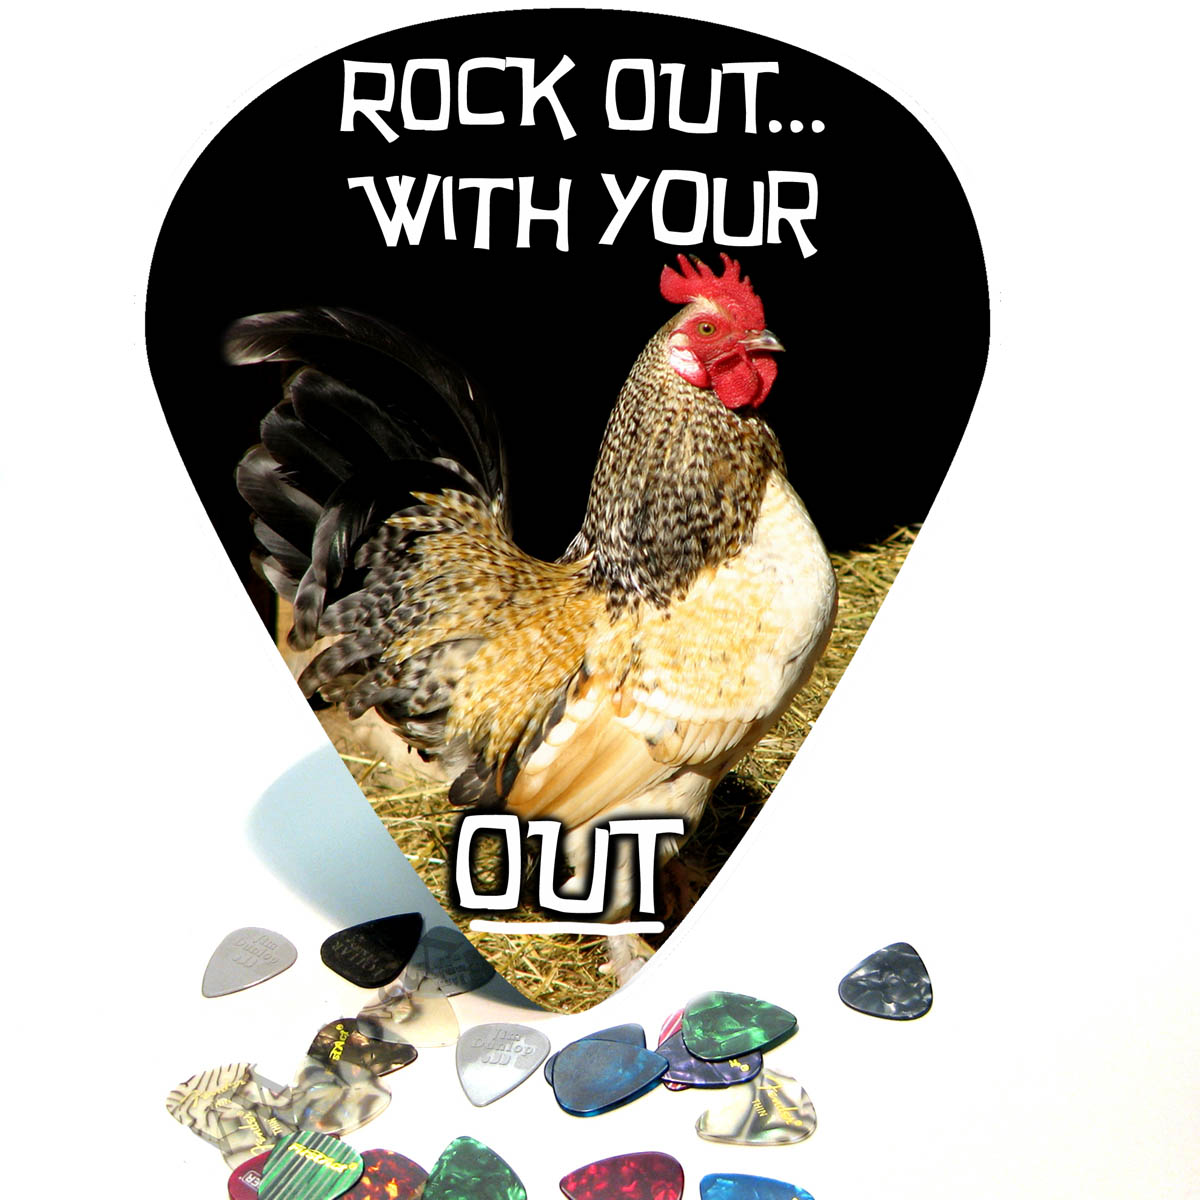 Rock Out With Your C!ck Out Giant Guitar Pick Wall Art – 1035